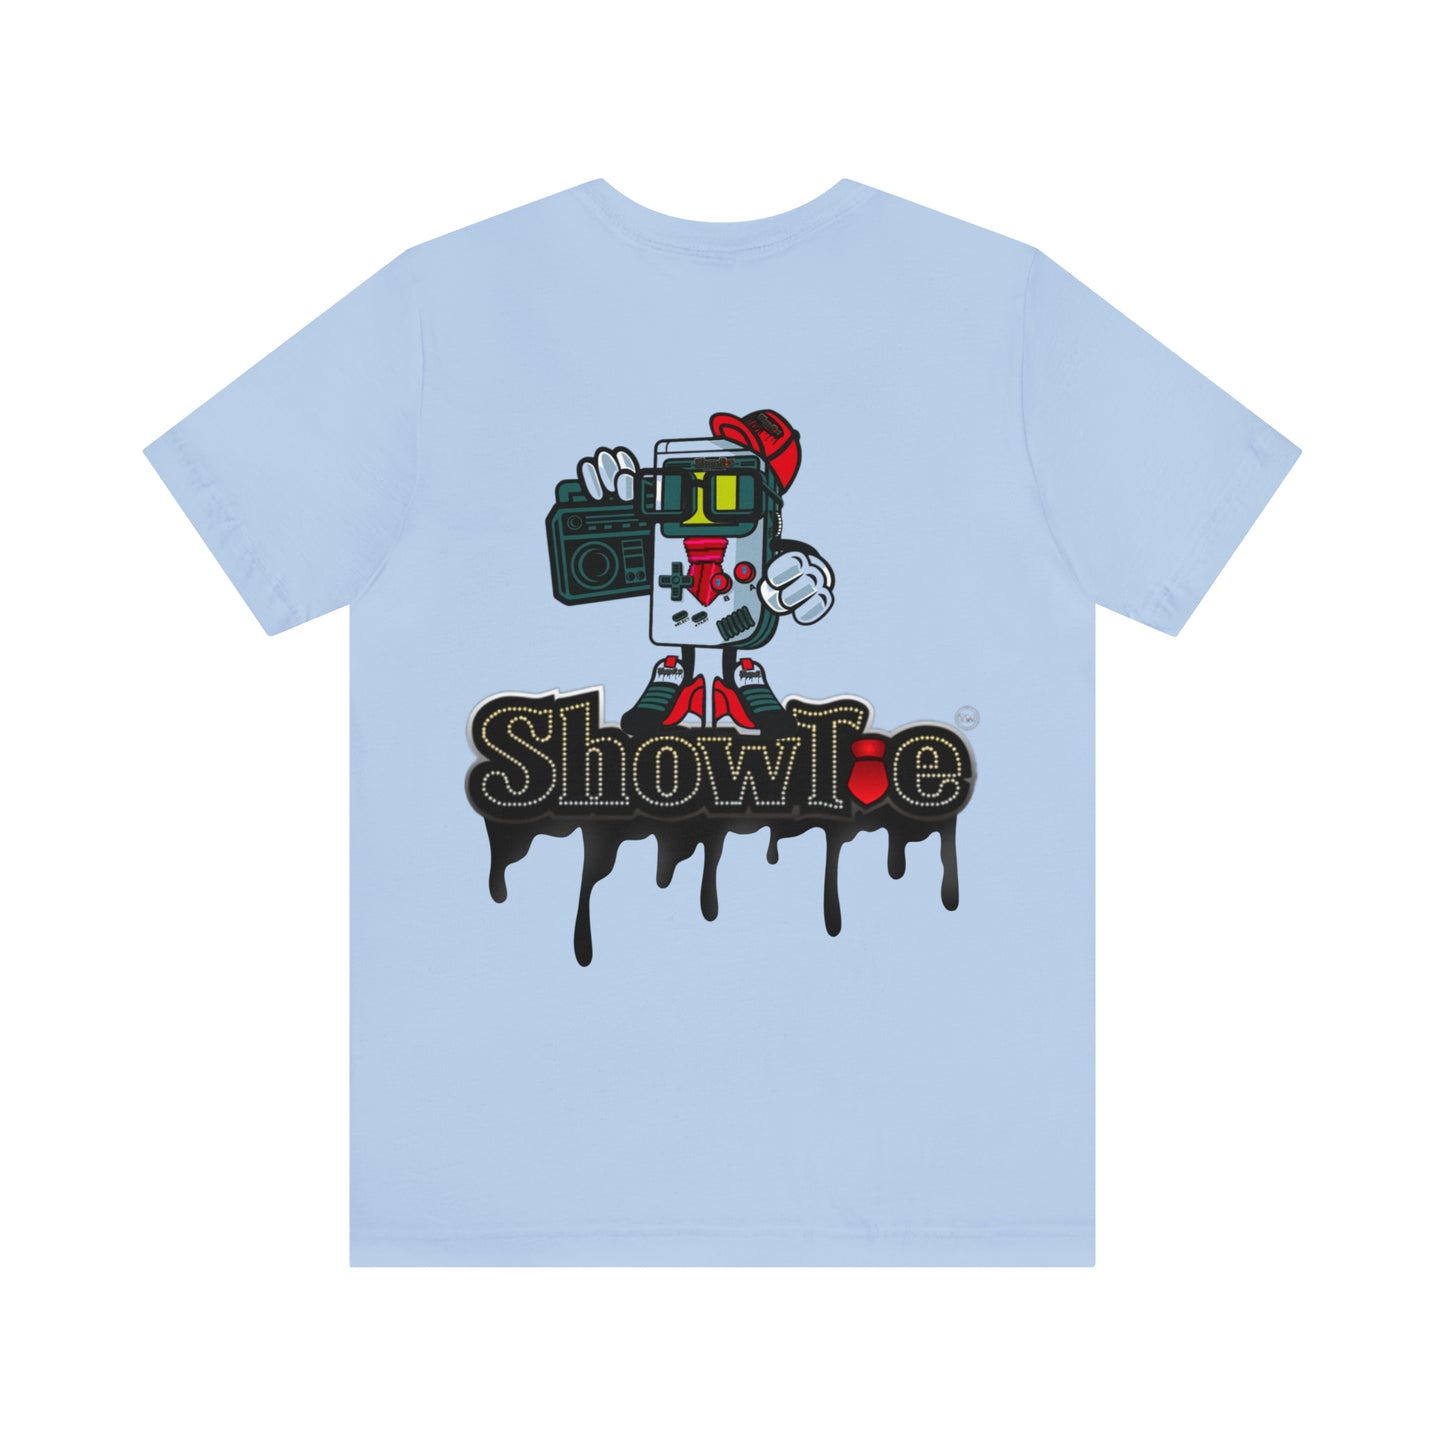 Back in the day Showtie Tee